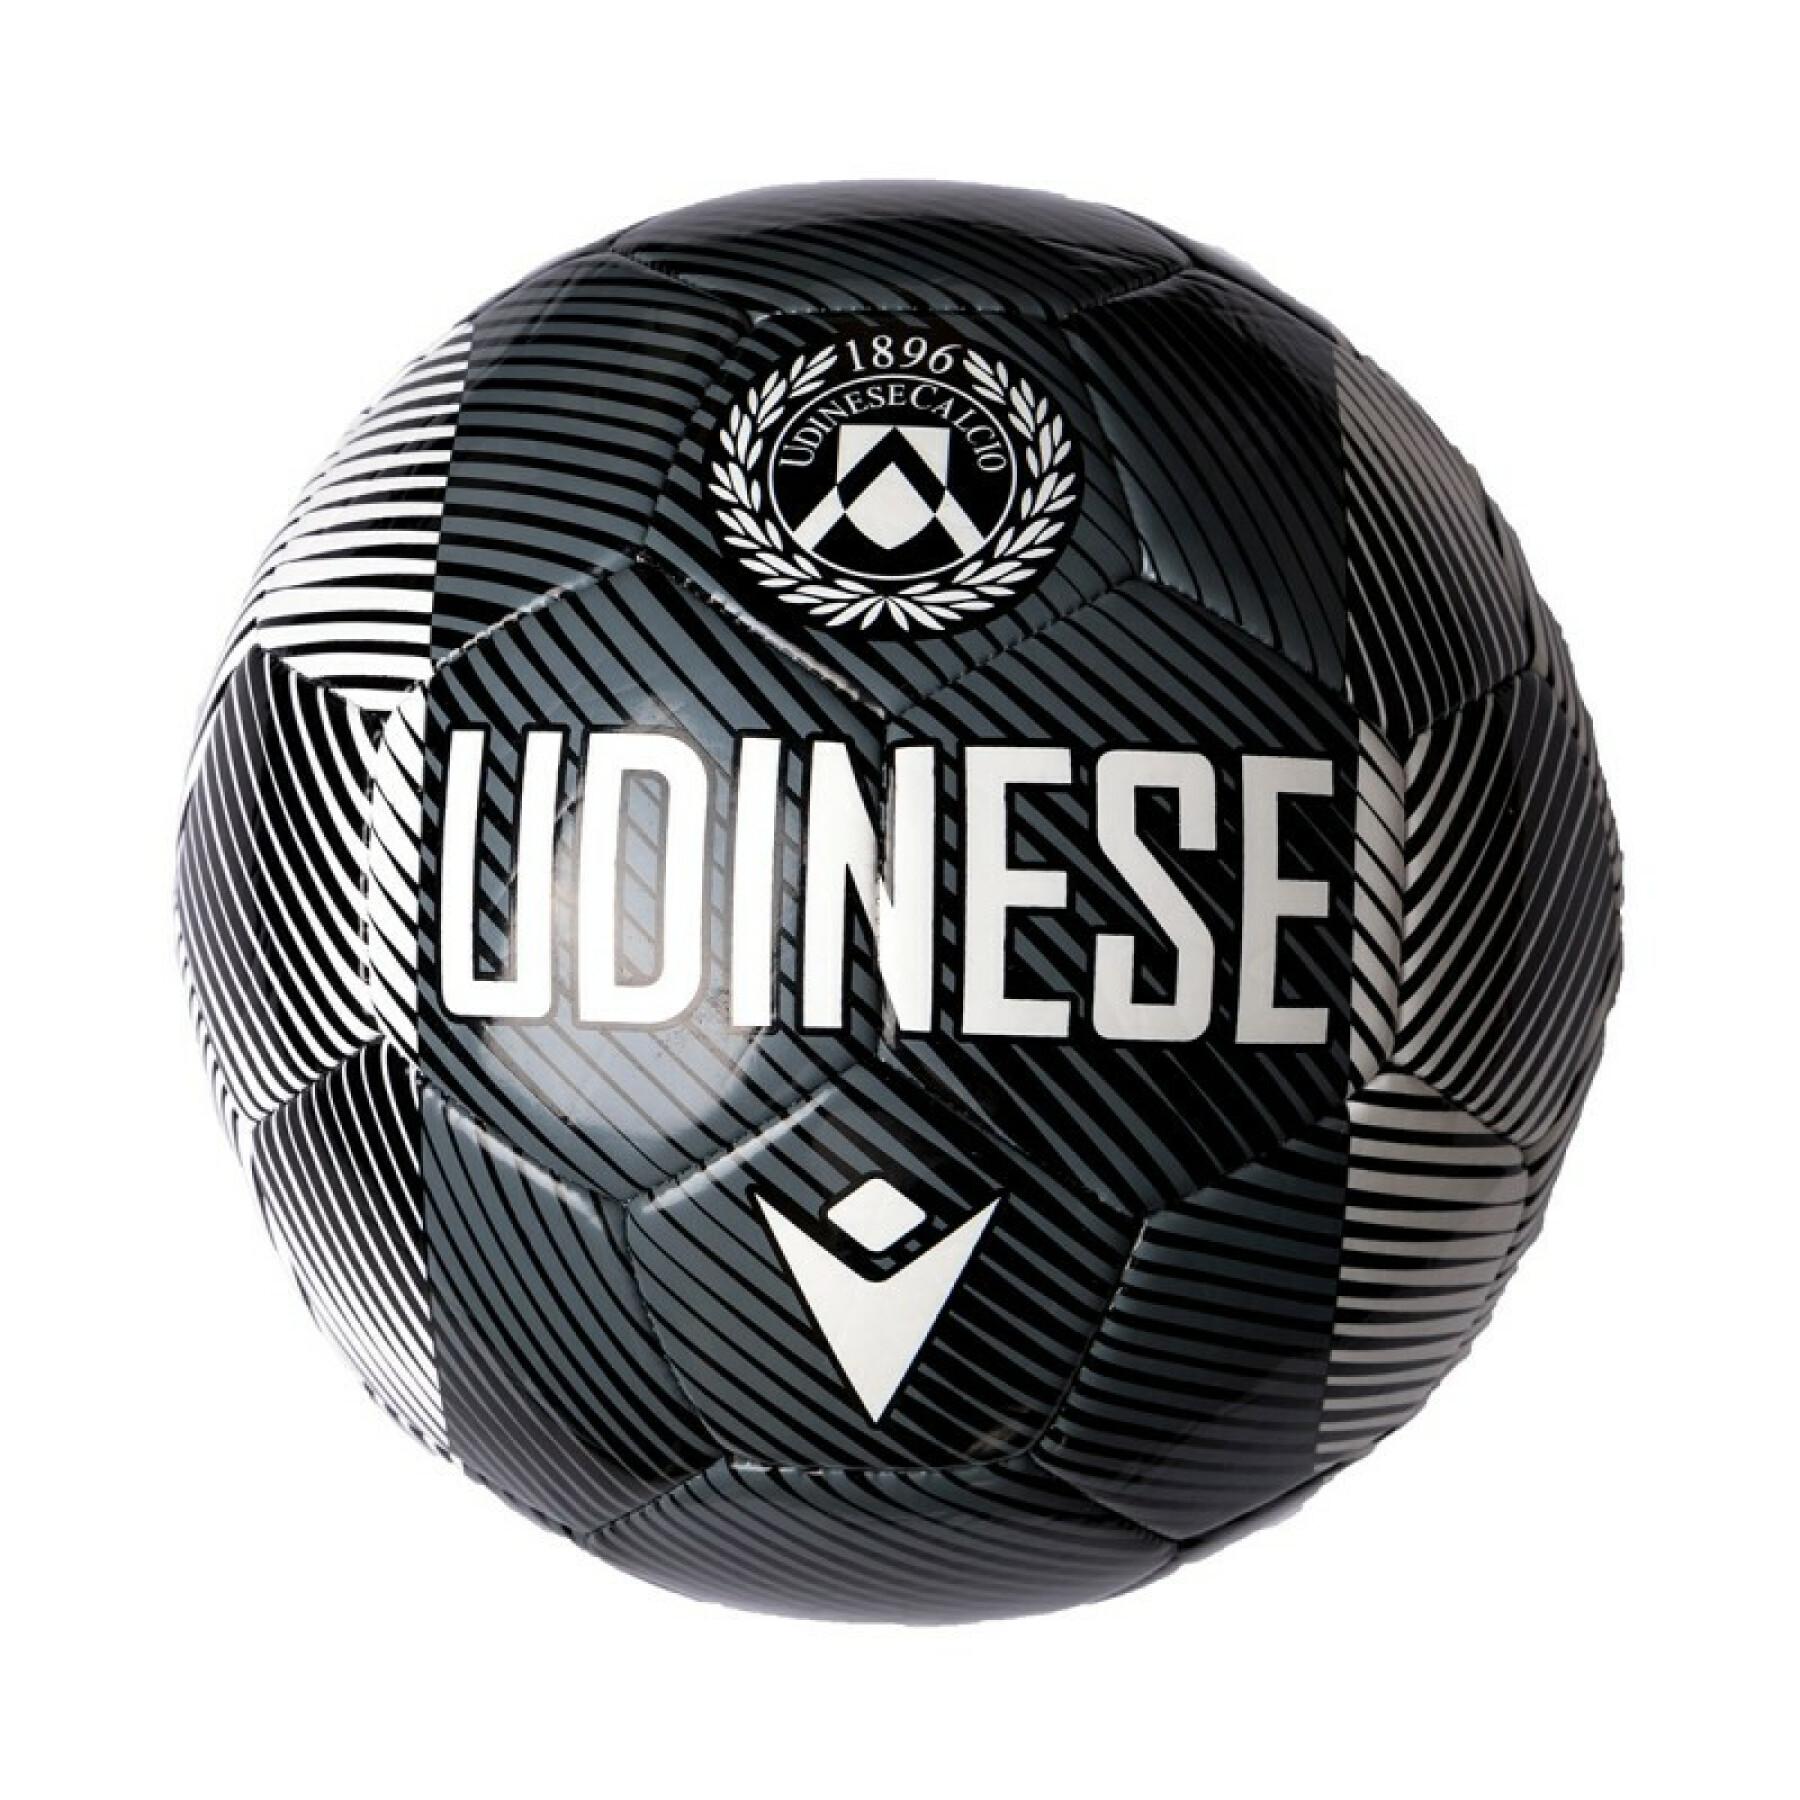 Palloncino Udinese